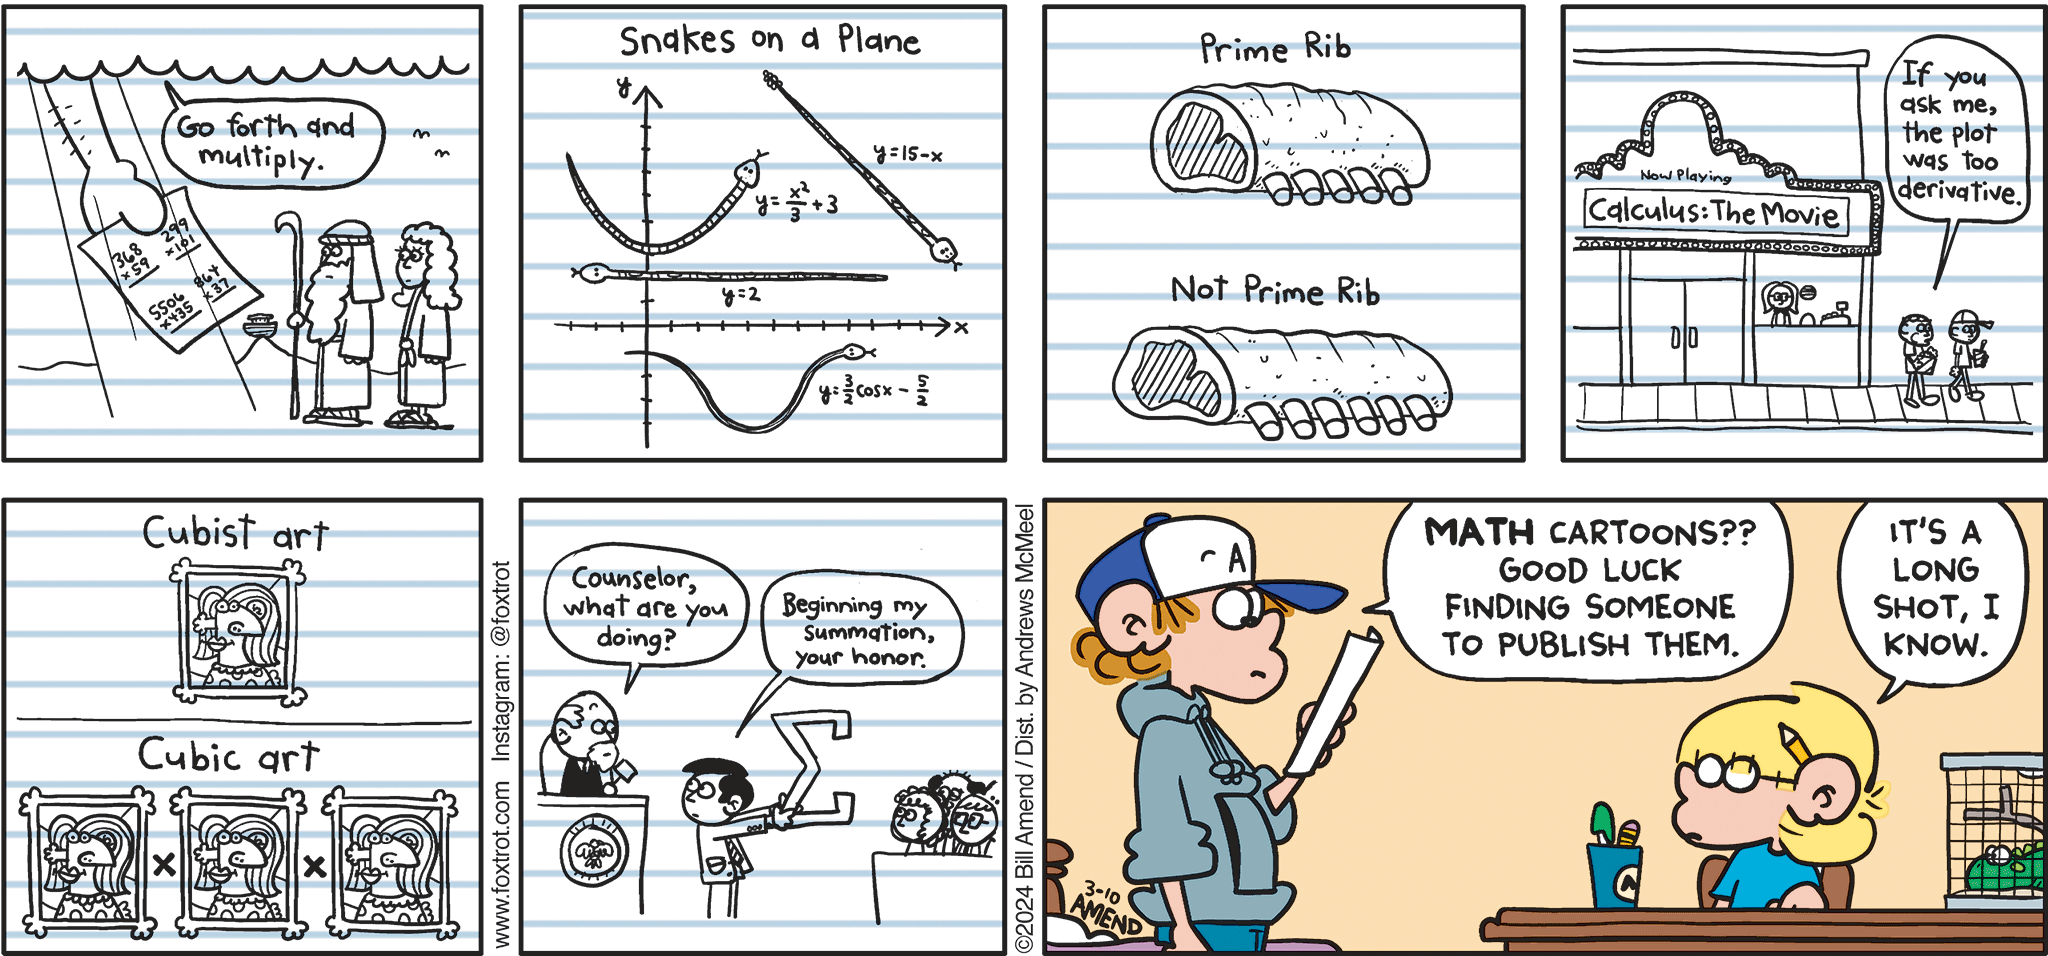 FoxTrot comic strip by Bill Amend - "Mathoons" published March 10, 2024 - Transcript: Go forth and multiply. Snakes on a plane. Prime rib. Not prime rib. Calculus: The Movie. If you ask me, the plot was too derivative. Cubist art. Cubic art. Counselor, what are you doing? Beginning my summation your honor. Peter Fox: Math cartoons? Good luck finding someone to publish them. Jason Fox: It's a long shot, I know. 